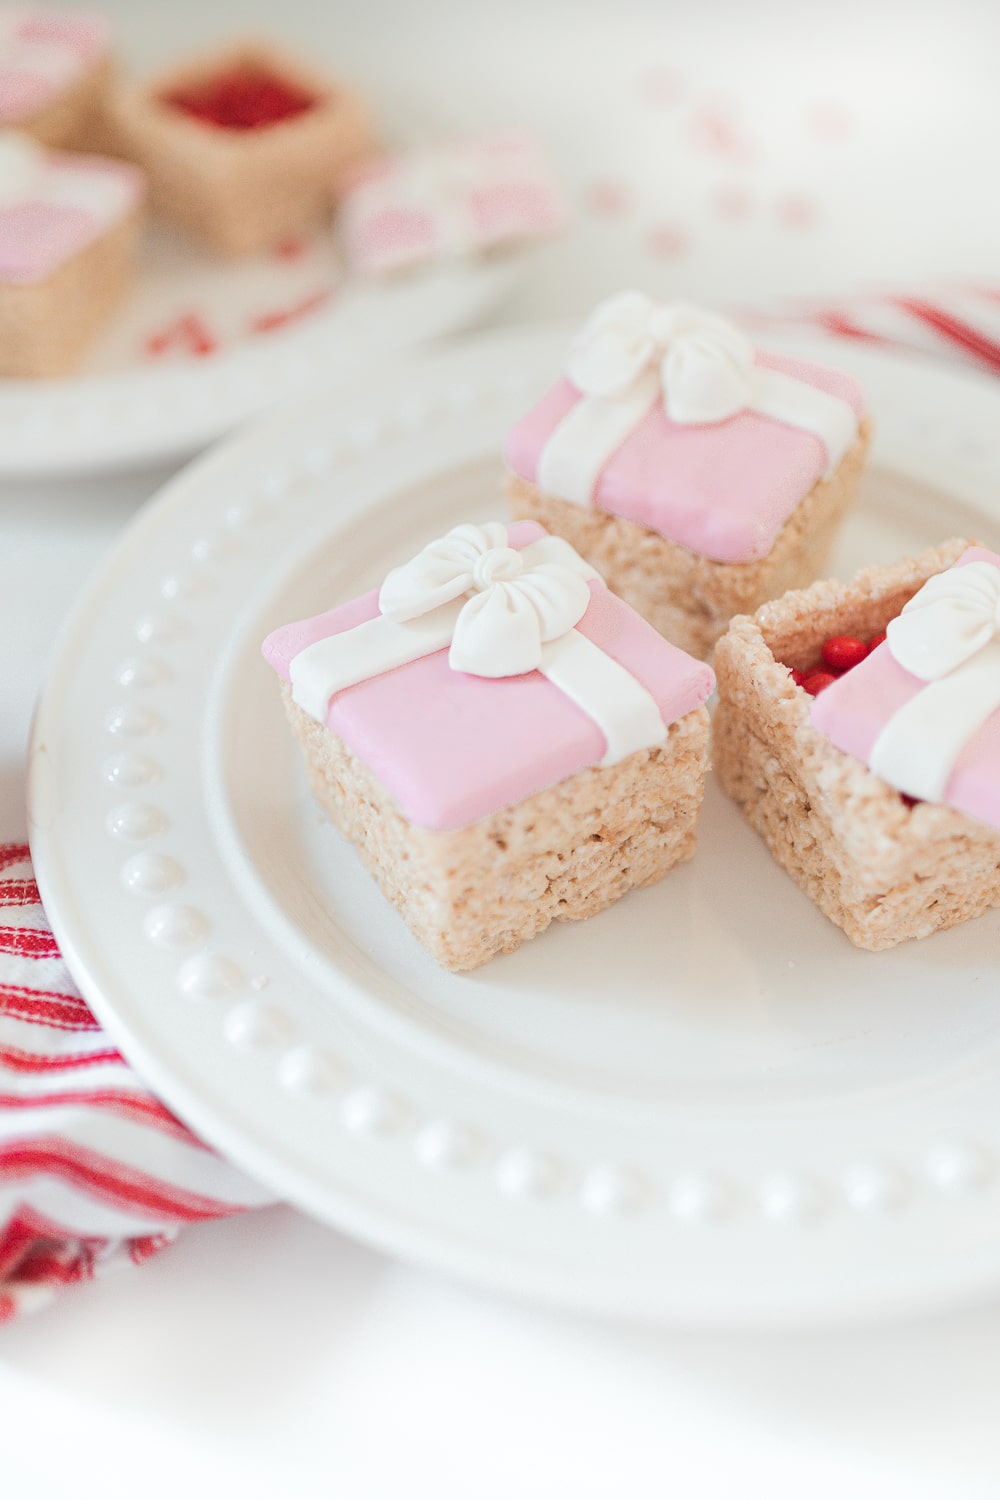 Rice krispie gift boxes decorated with pink and white Wilton fondant by southern lifestyle blogger Stephanie Ziajka on Diary of a Debutante